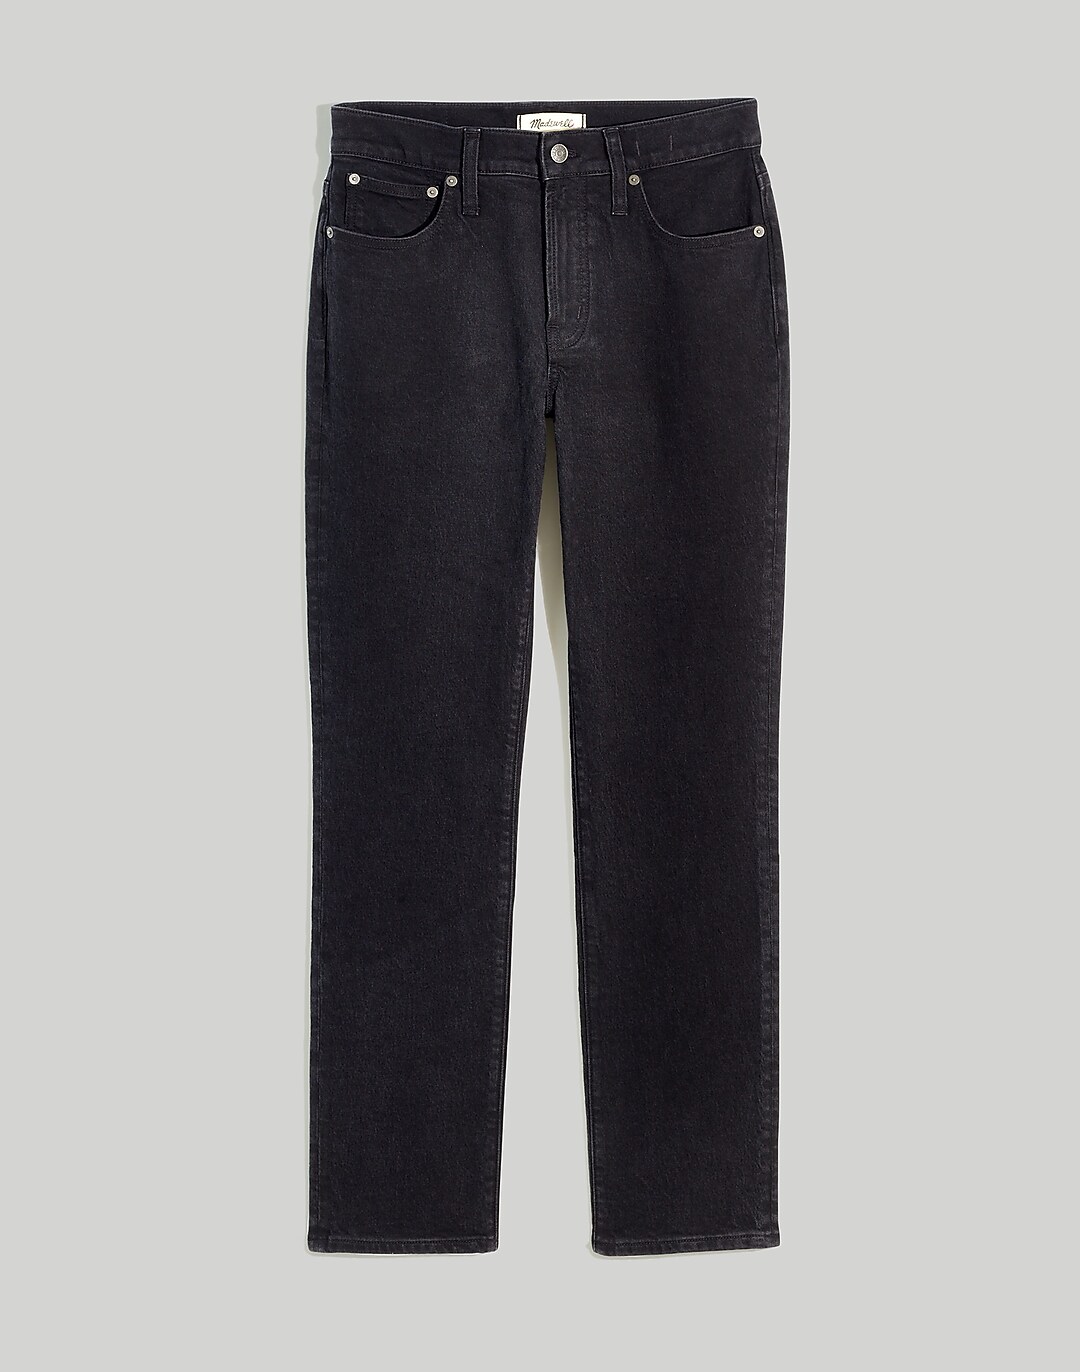 The Mid-Rise Perfect Jean in Clean Wash